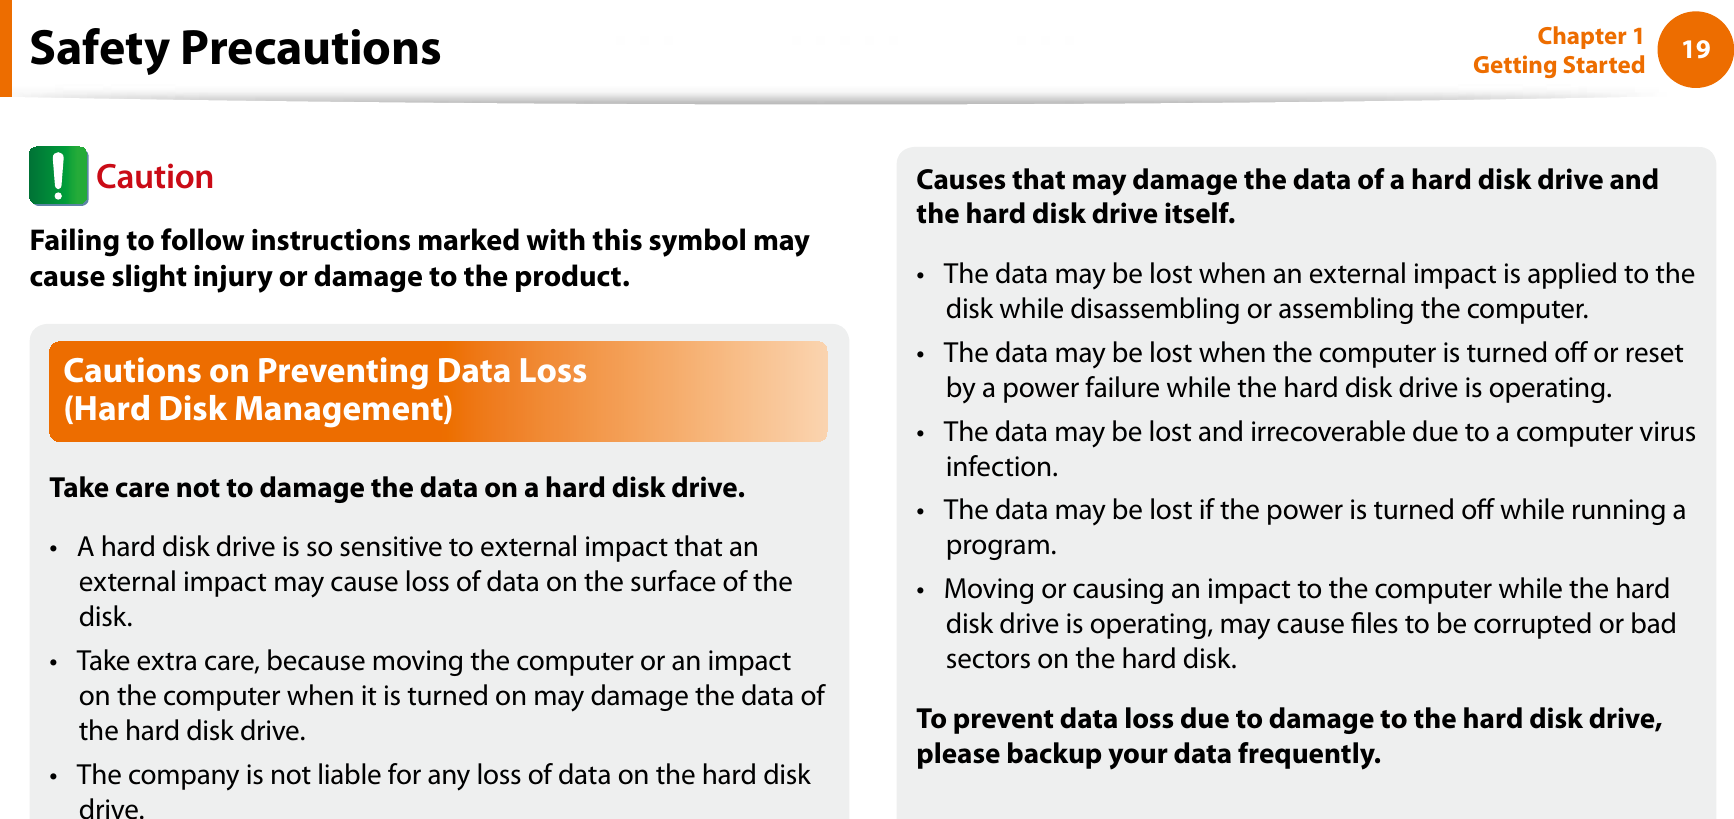 19Chapter 1 Getting StartedCautions on Preventing Data Loss (Hard Disk Management)Take care not to damage the data on a hard disk drive.A hard disk drive is so sensitive to external impact that an texternal impact may cause loss of data on the surface of the disk.Take extra care, because moving the computer or an impact ton the computer when it is turned on may damage the data of the hard disk drive.The company is not liable for any loss of data on the hard disk tdrive.Causes that may damage the data of a hard disk drive and the hard disk drive itself.The data may be lost when an external impact is applied to the tdisk while disassembling or assembling the computer.The data may be lost when the computer is turned o or reset tby a power failure while the hard disk drive is operating.The data may be lost and irrecoverable due to a computer virus tinfection.The data may be lost if the power is turned o while running a tprogram.Moving or causing an impact to the computer while the hard tdisk drive is operating, may cause les to be corrupted or bad sectors on the hard disk.To prevent data loss due to damage to the hard disk drive, please backup your data frequently.Safety PrecautionsCautionFailing to follow instructions marked with this symbol may cause slight injury or damage to the product.